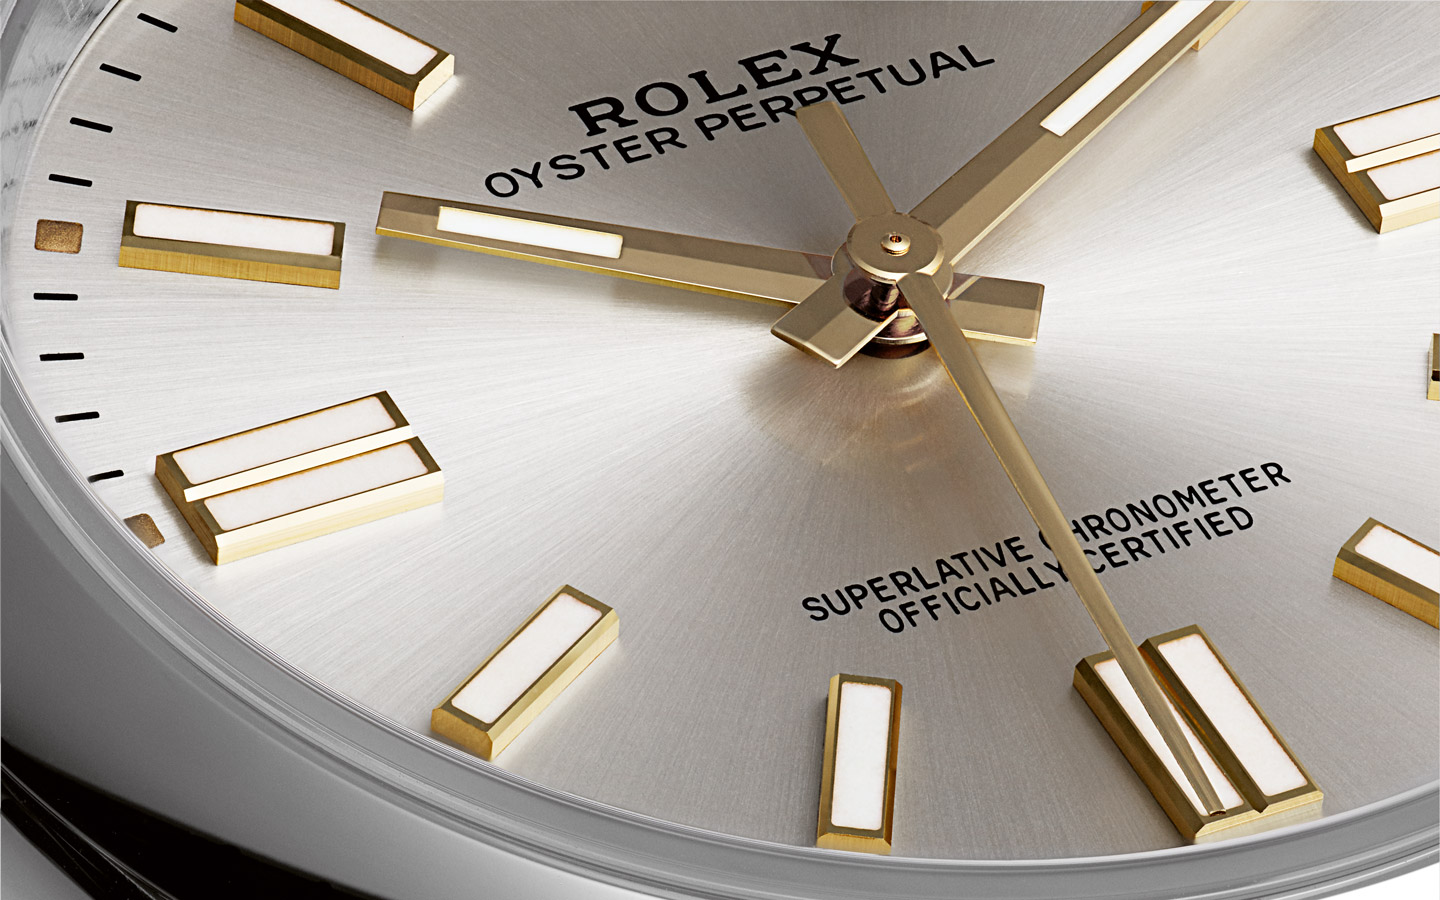 Oyster Perpetual The essence of the oyster two column desktop x